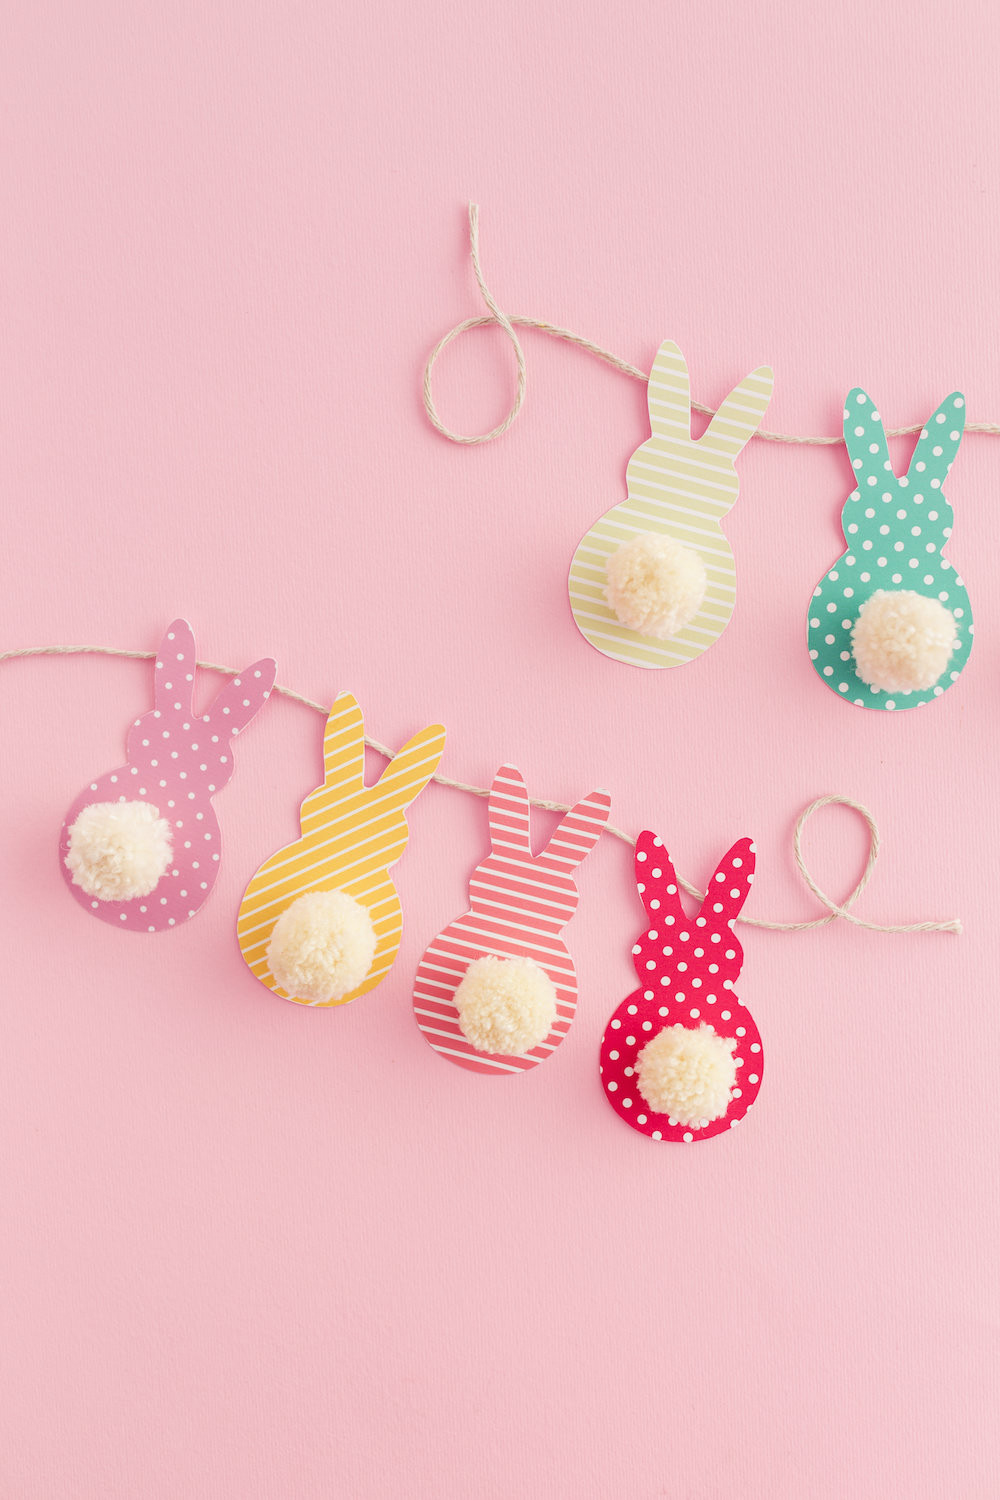 Easter Decoration Ideas For Kids
 1001 Ideas for Easter Crafts for Kids and Parents